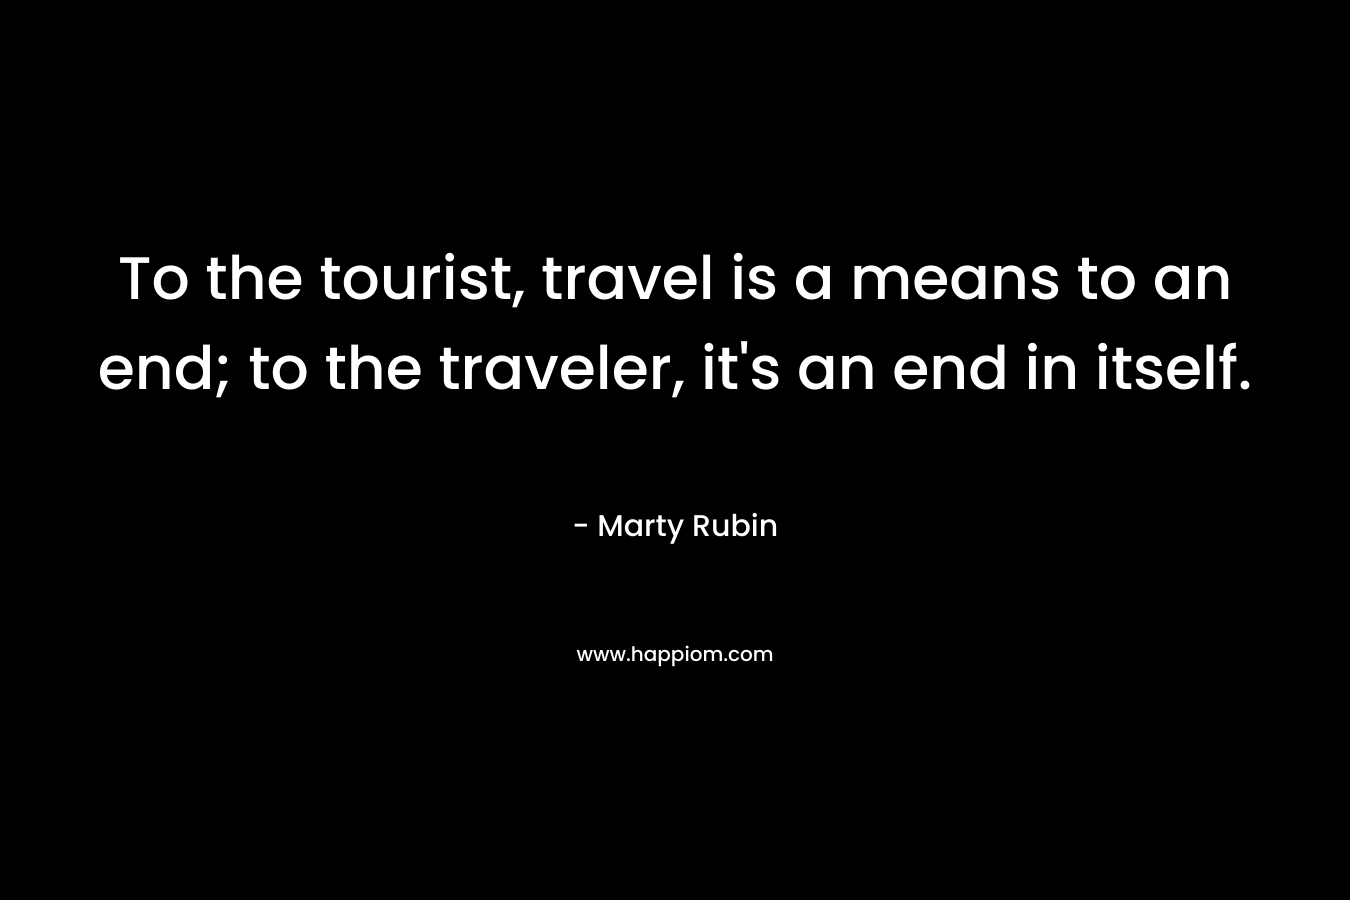 To the tourist, travel is a means to an end; to the traveler, it's an end in itself.